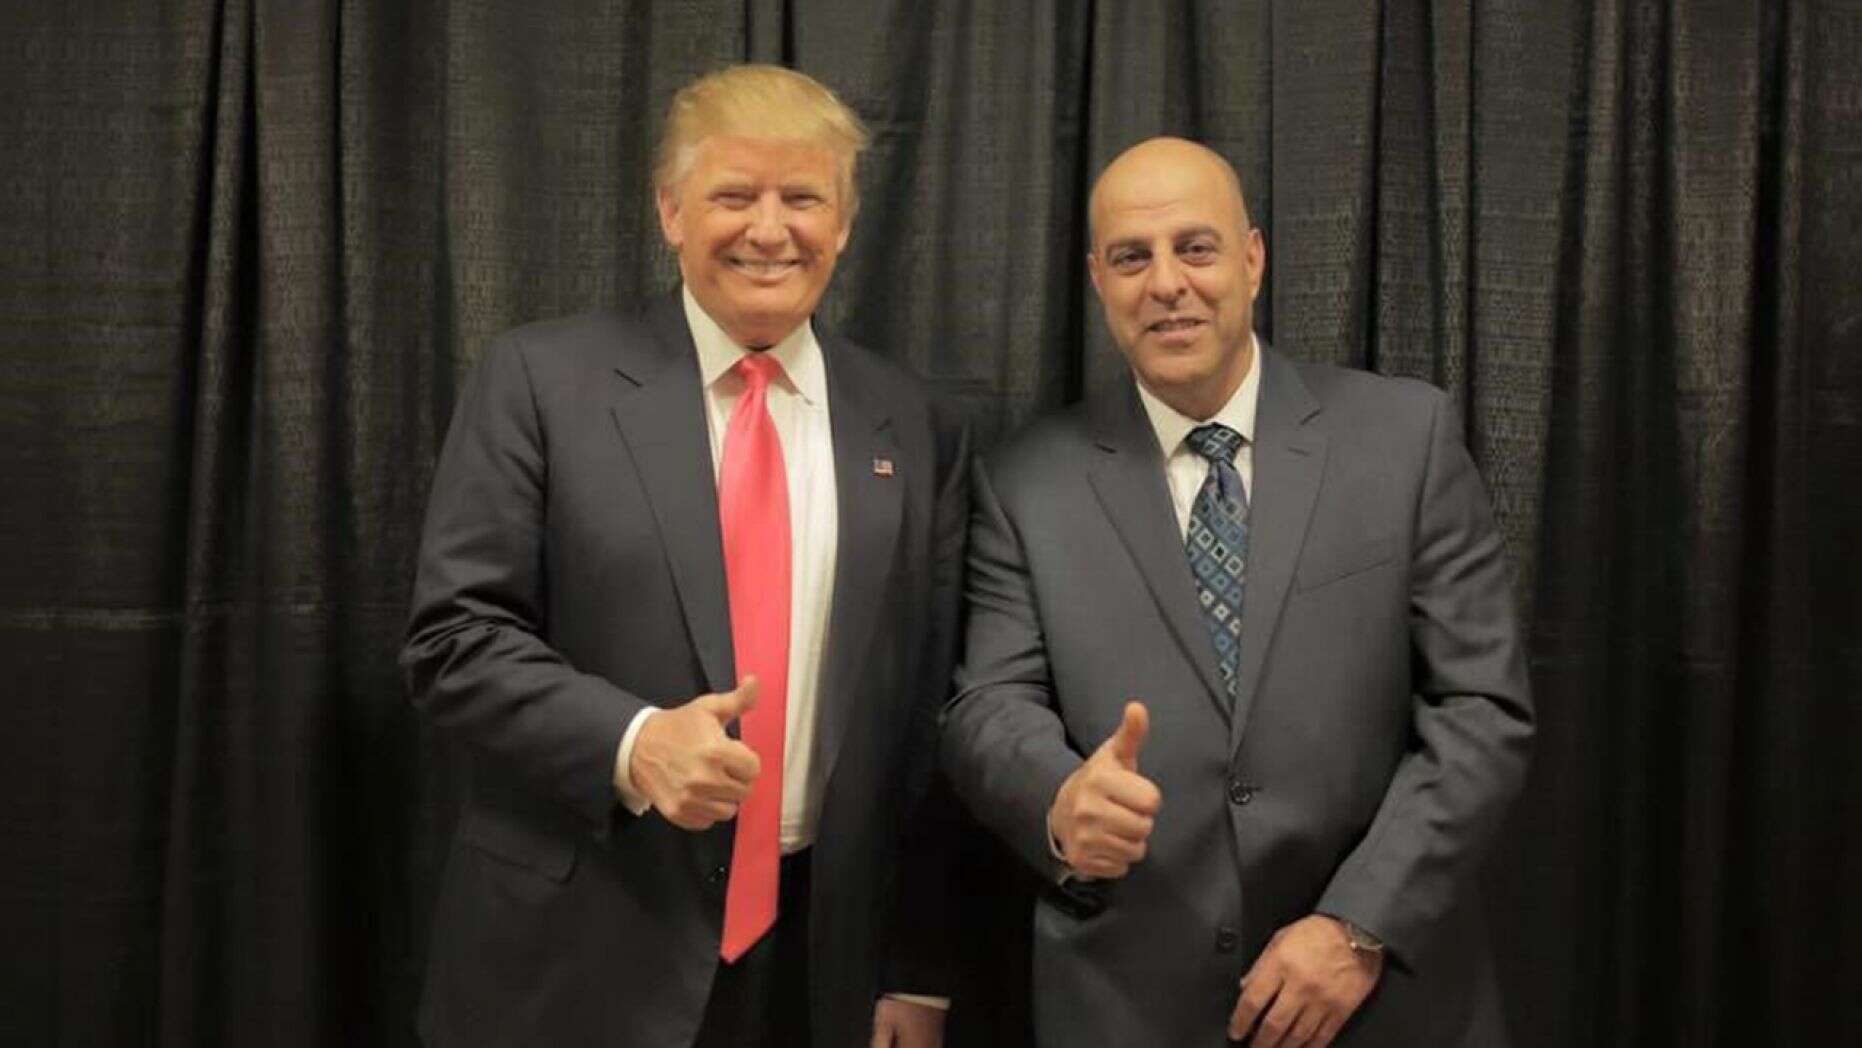 Amer Fakhoury President Trump at campain